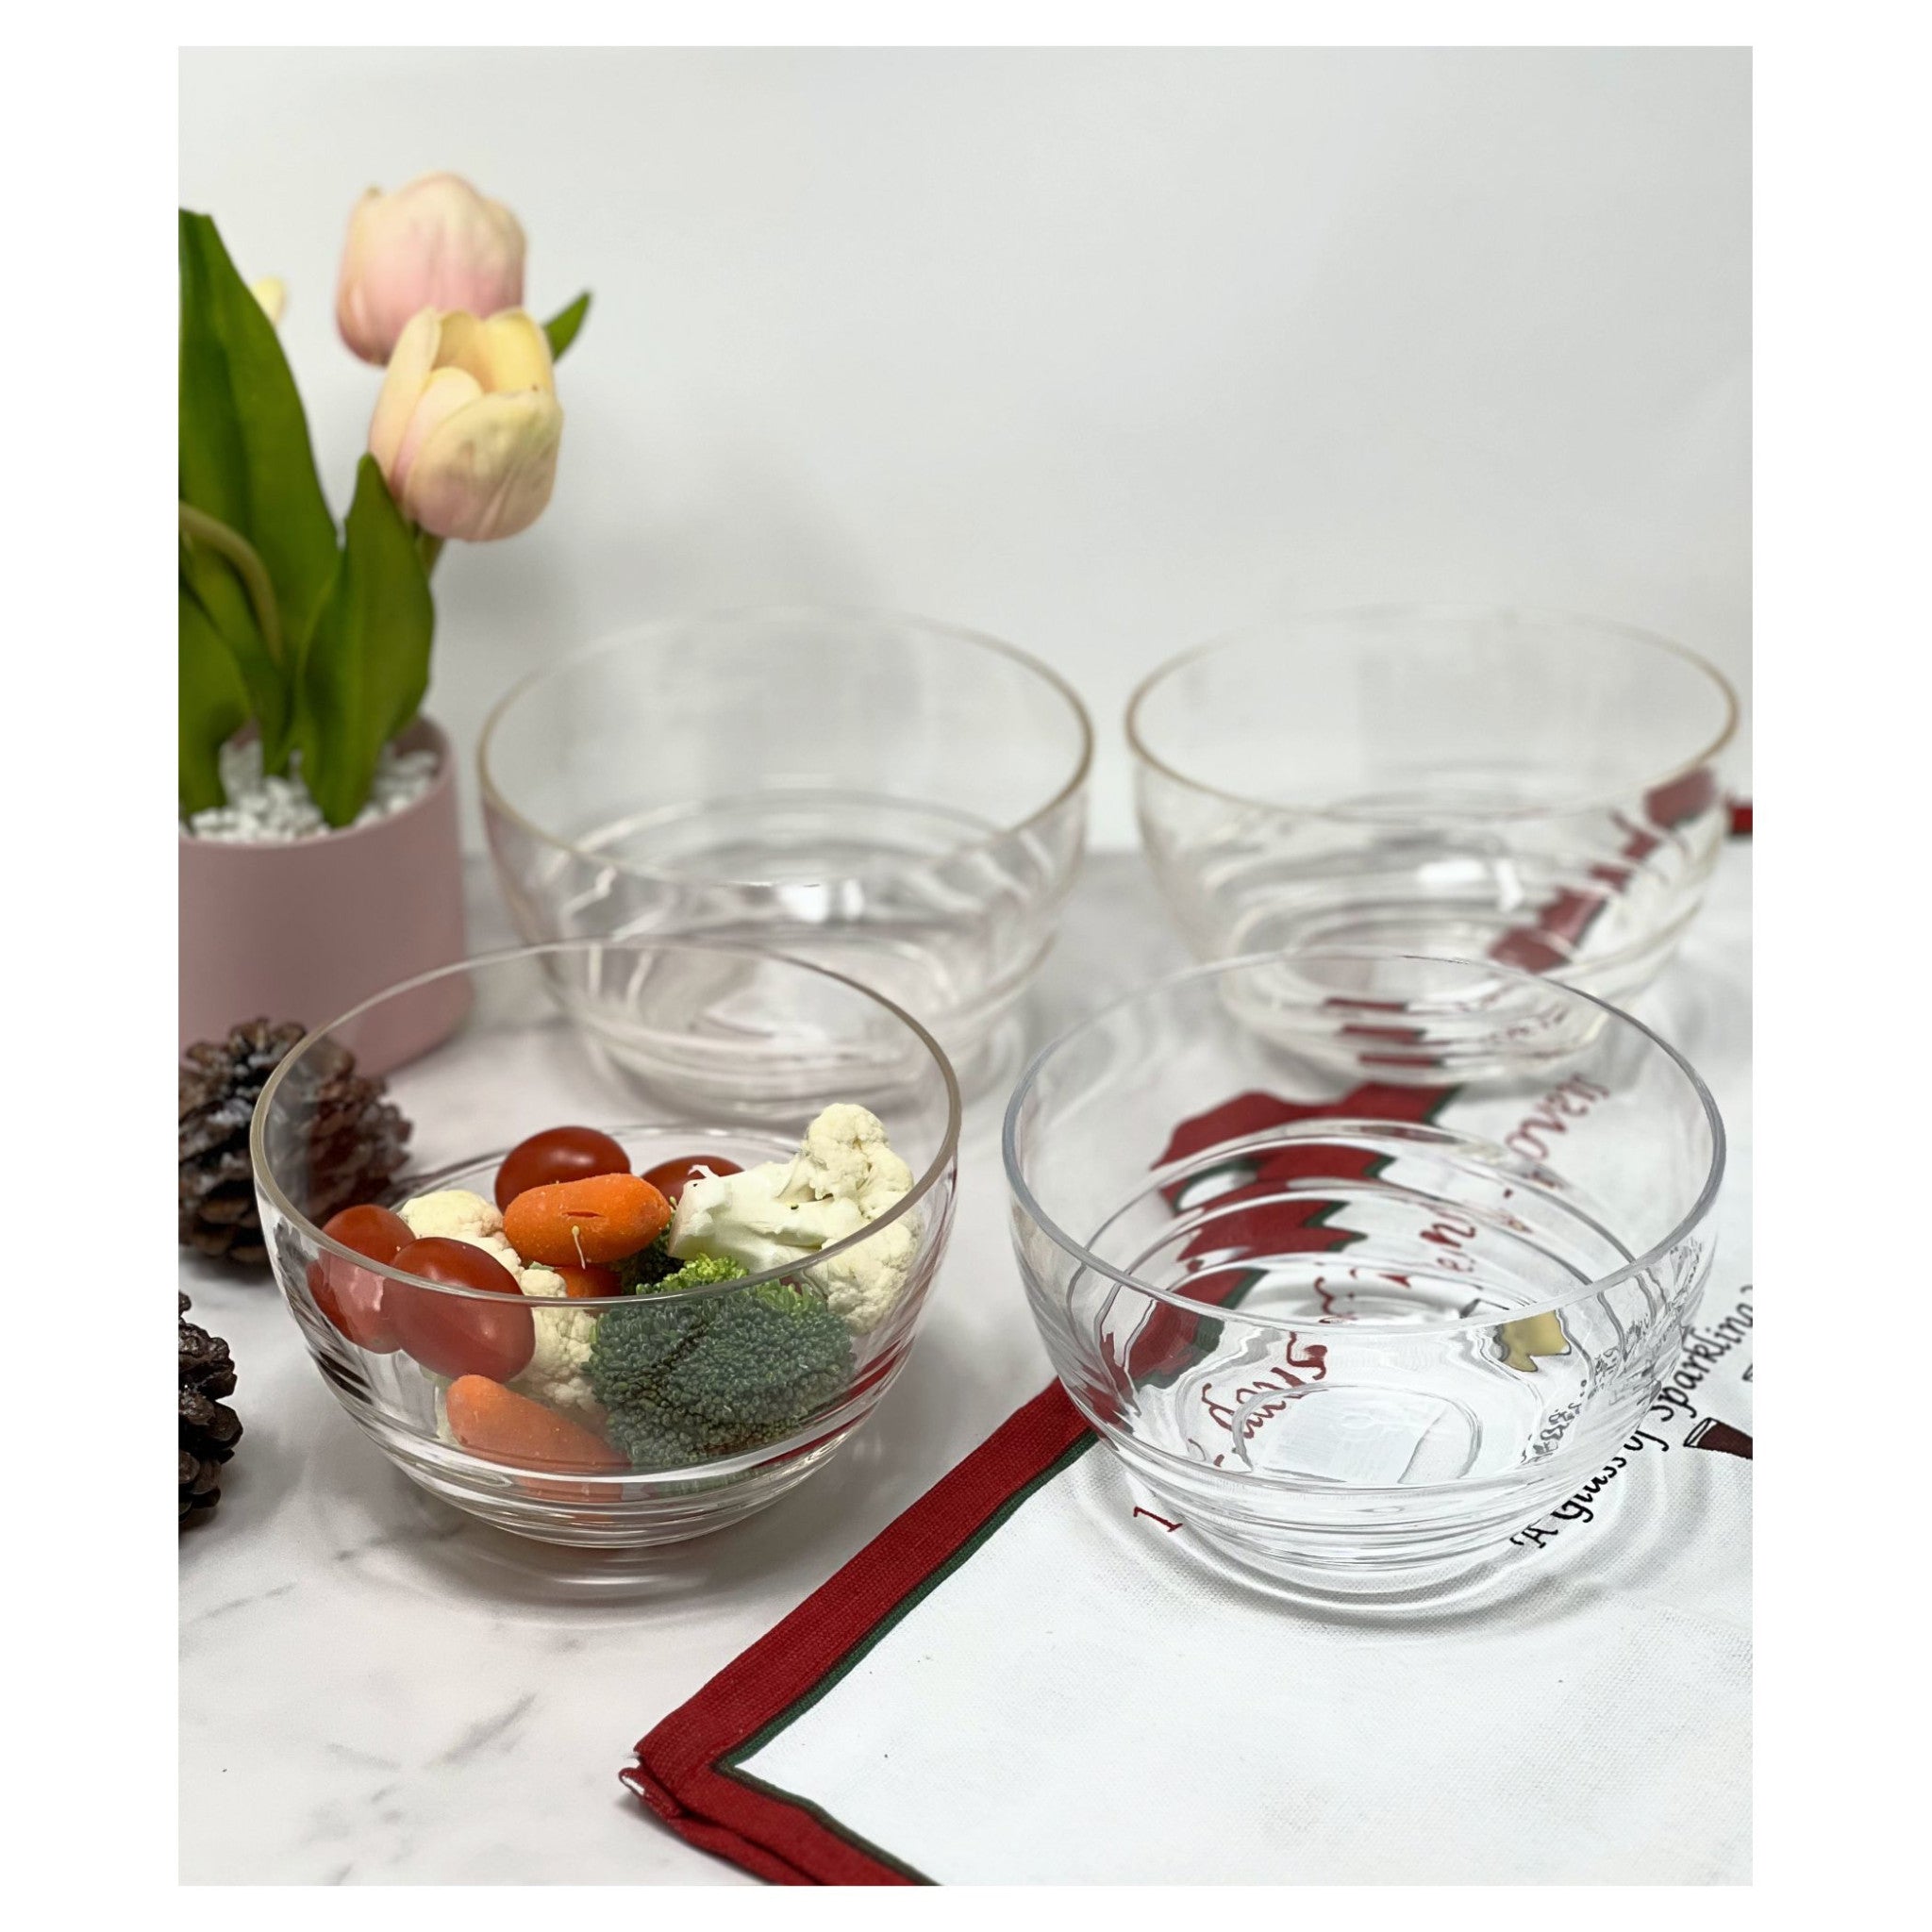 Clear Four Piece Round Swirl Acrylic Service For Four Bowl Set